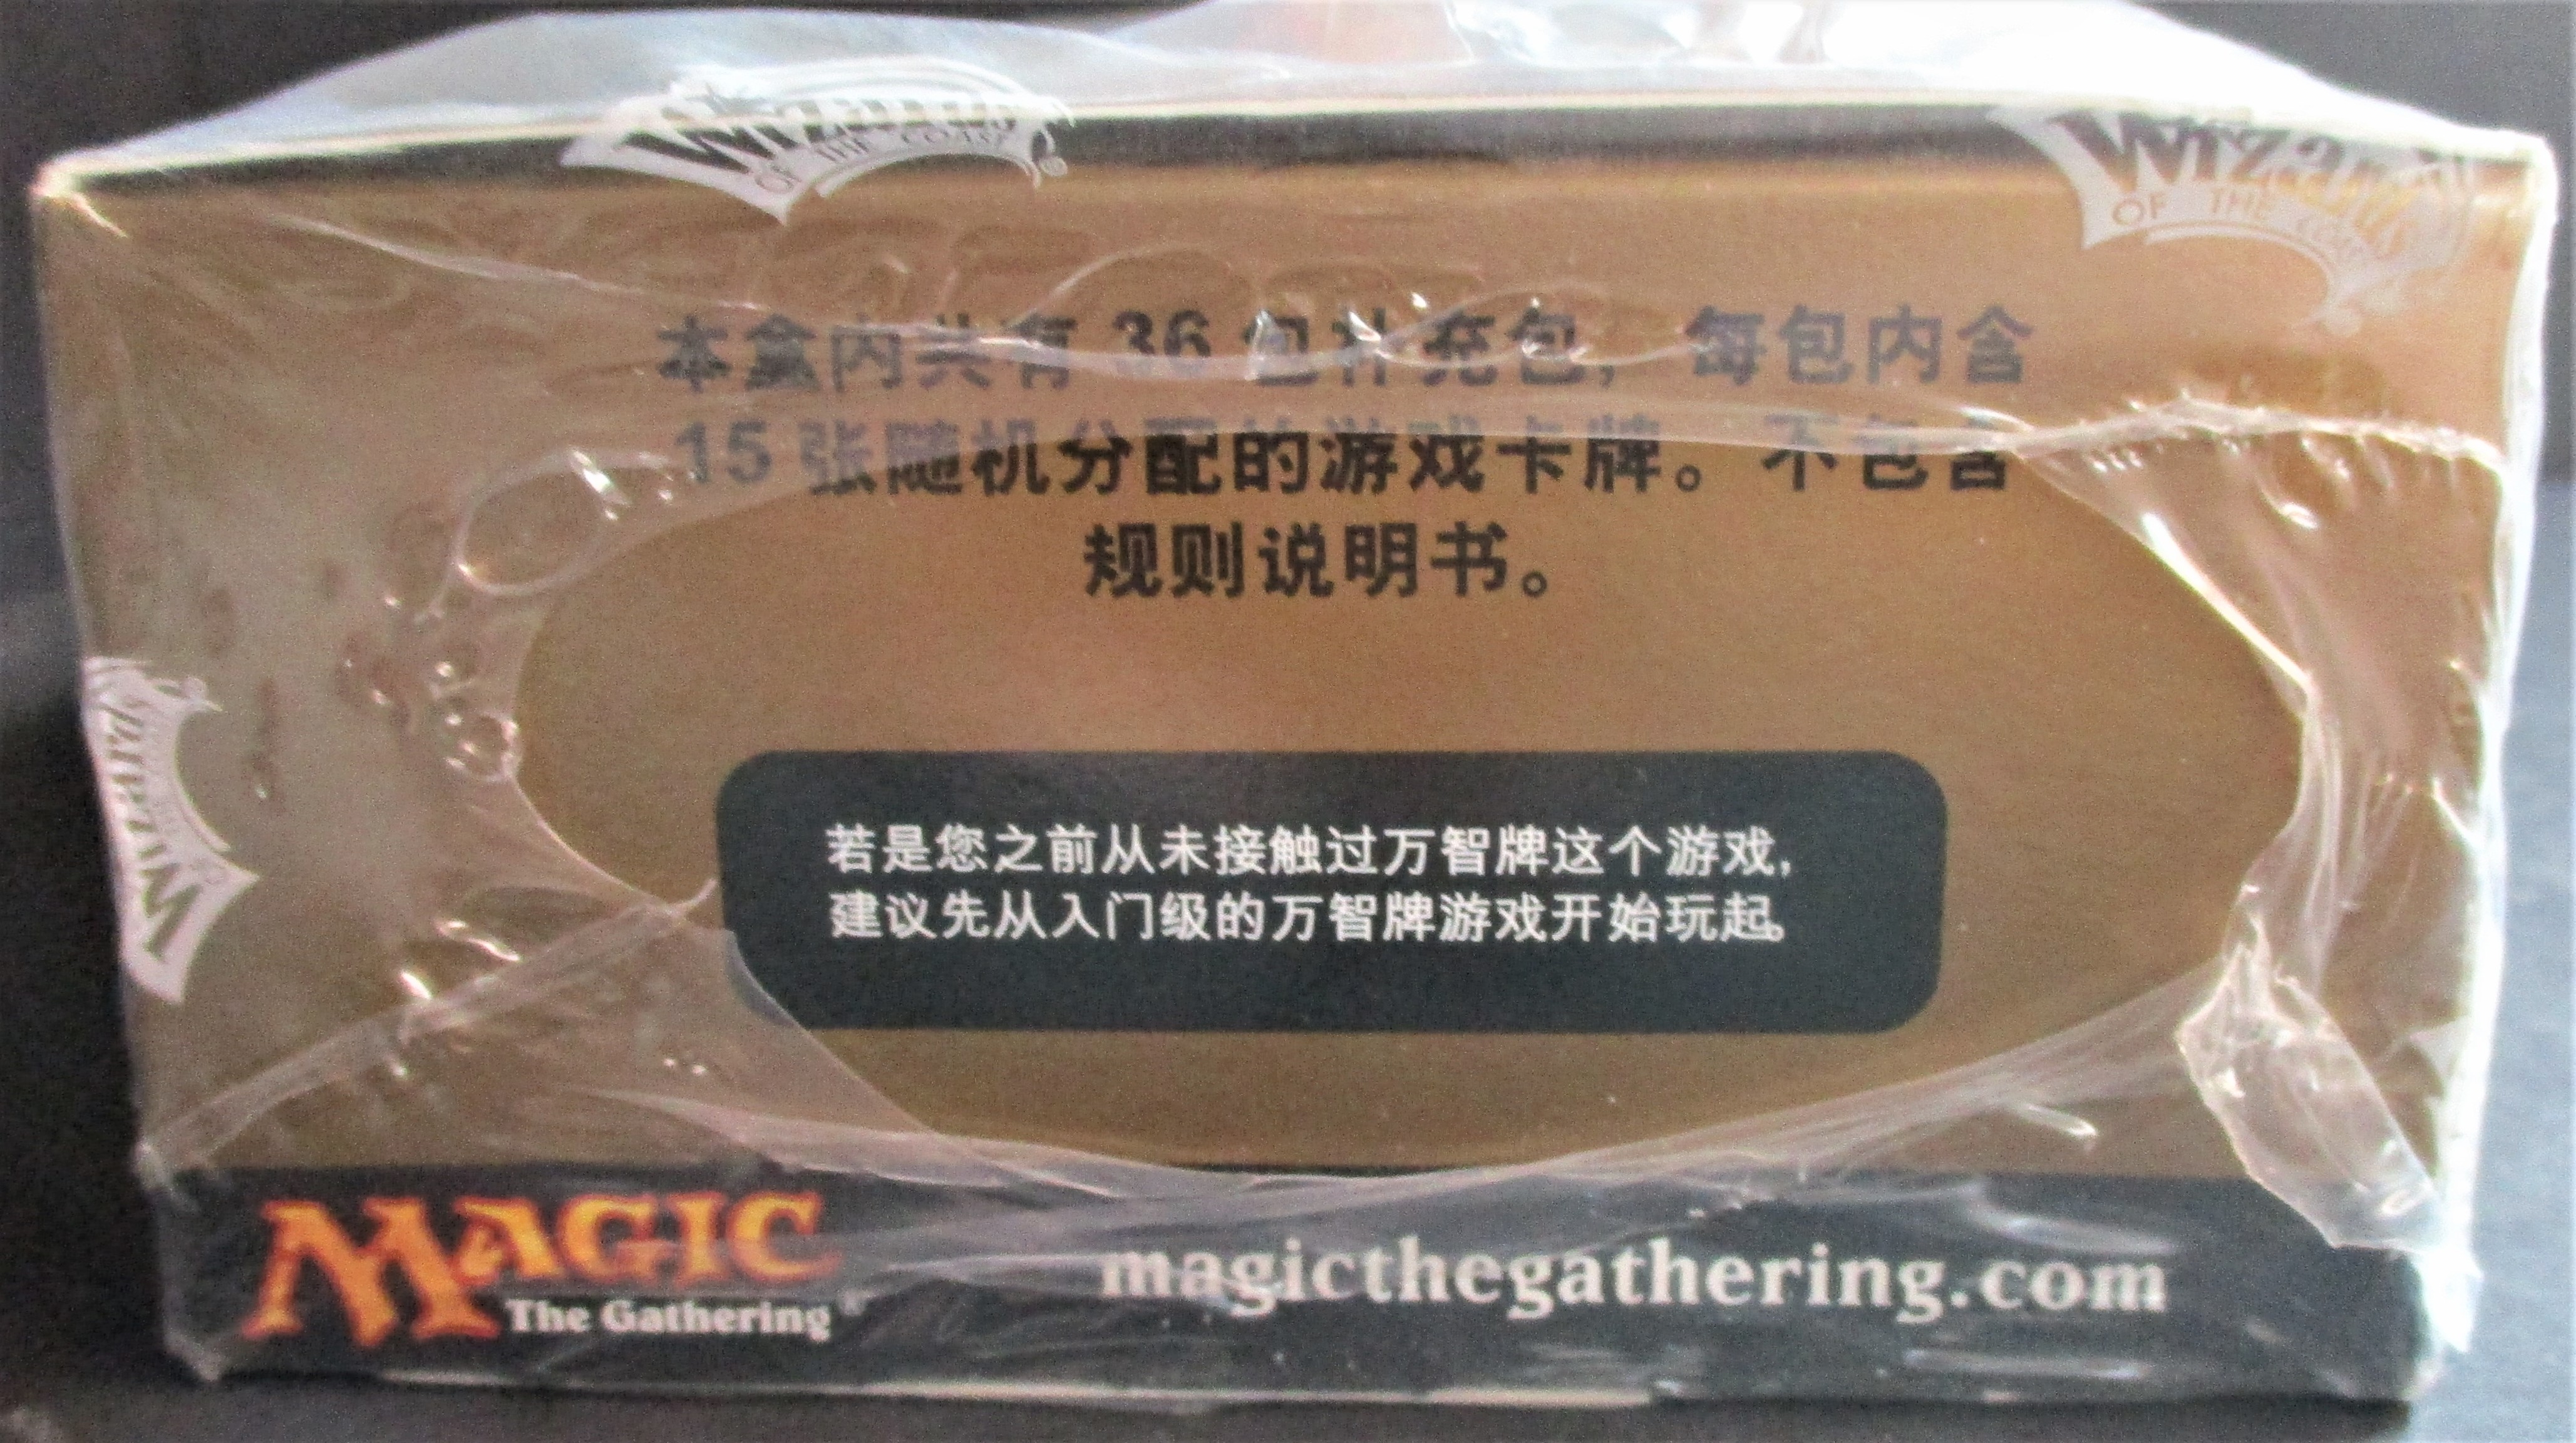 Legions Booster Box CHINESE SEALED